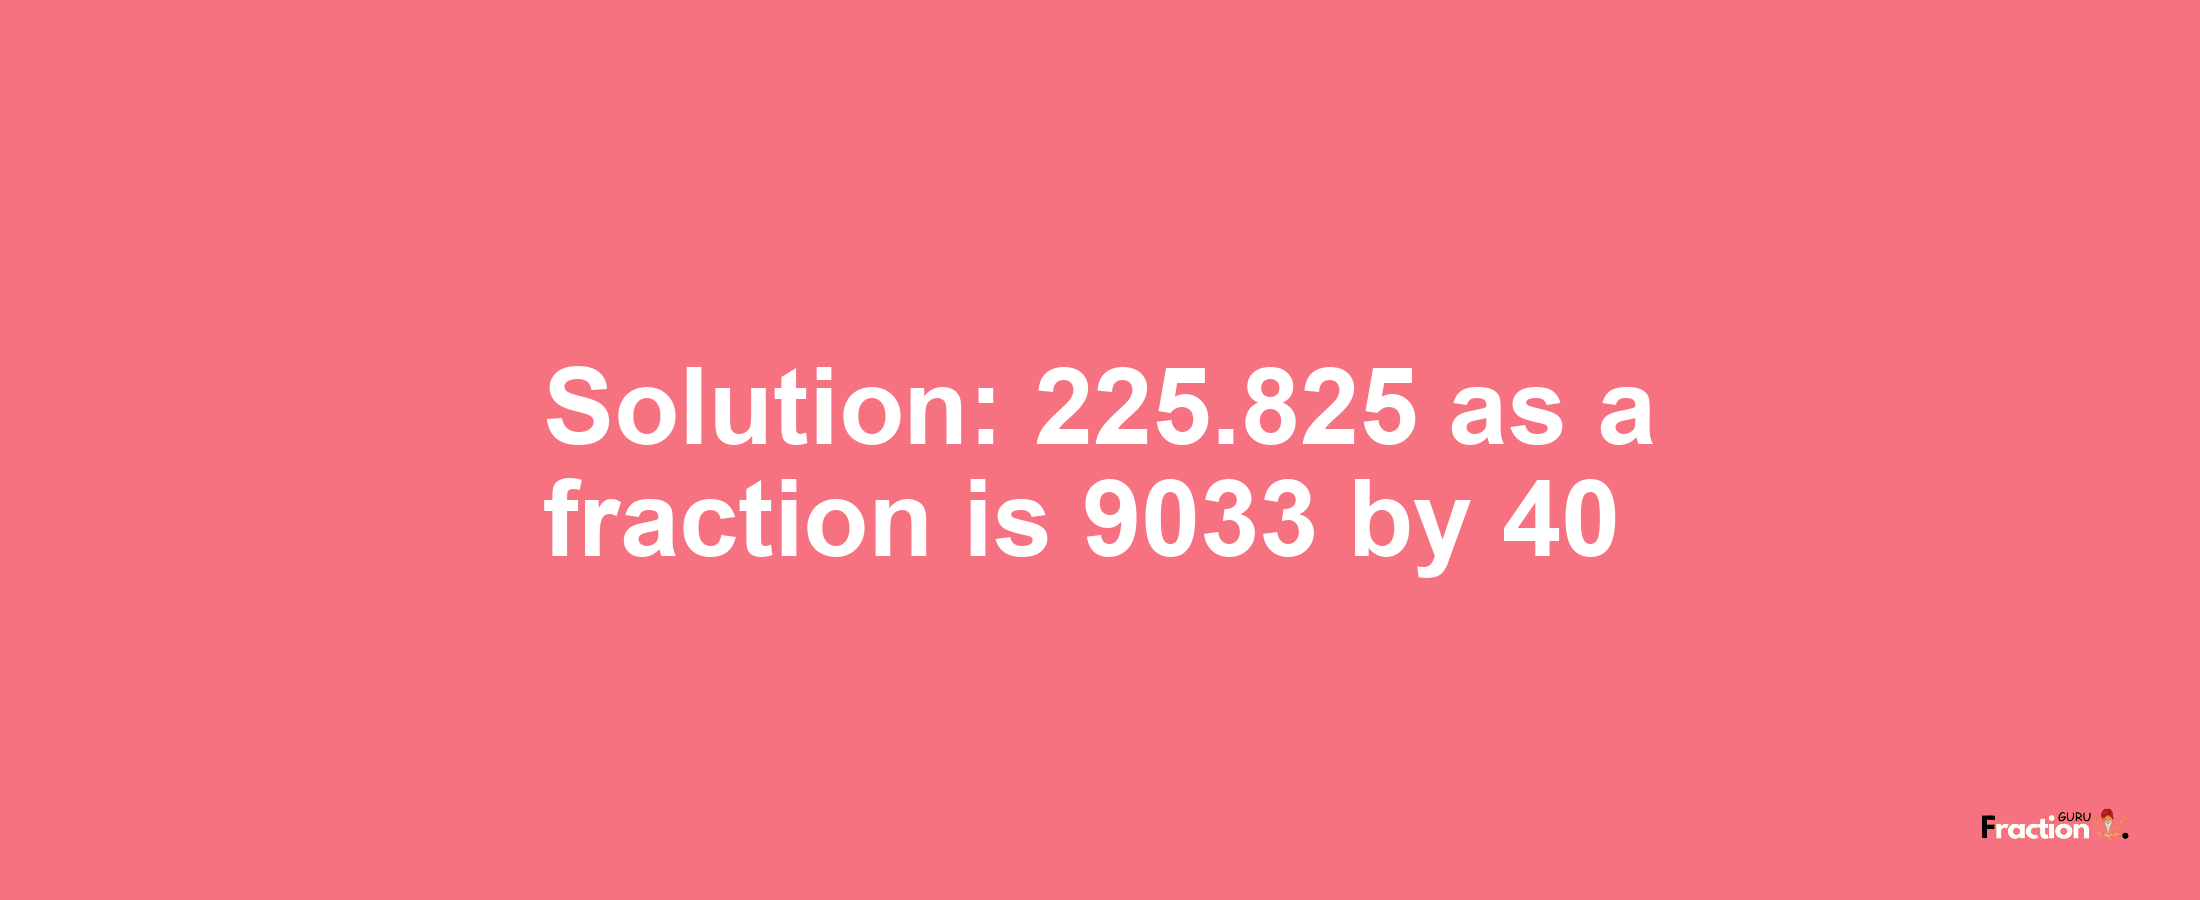 Solution:225.825 as a fraction is 9033/40